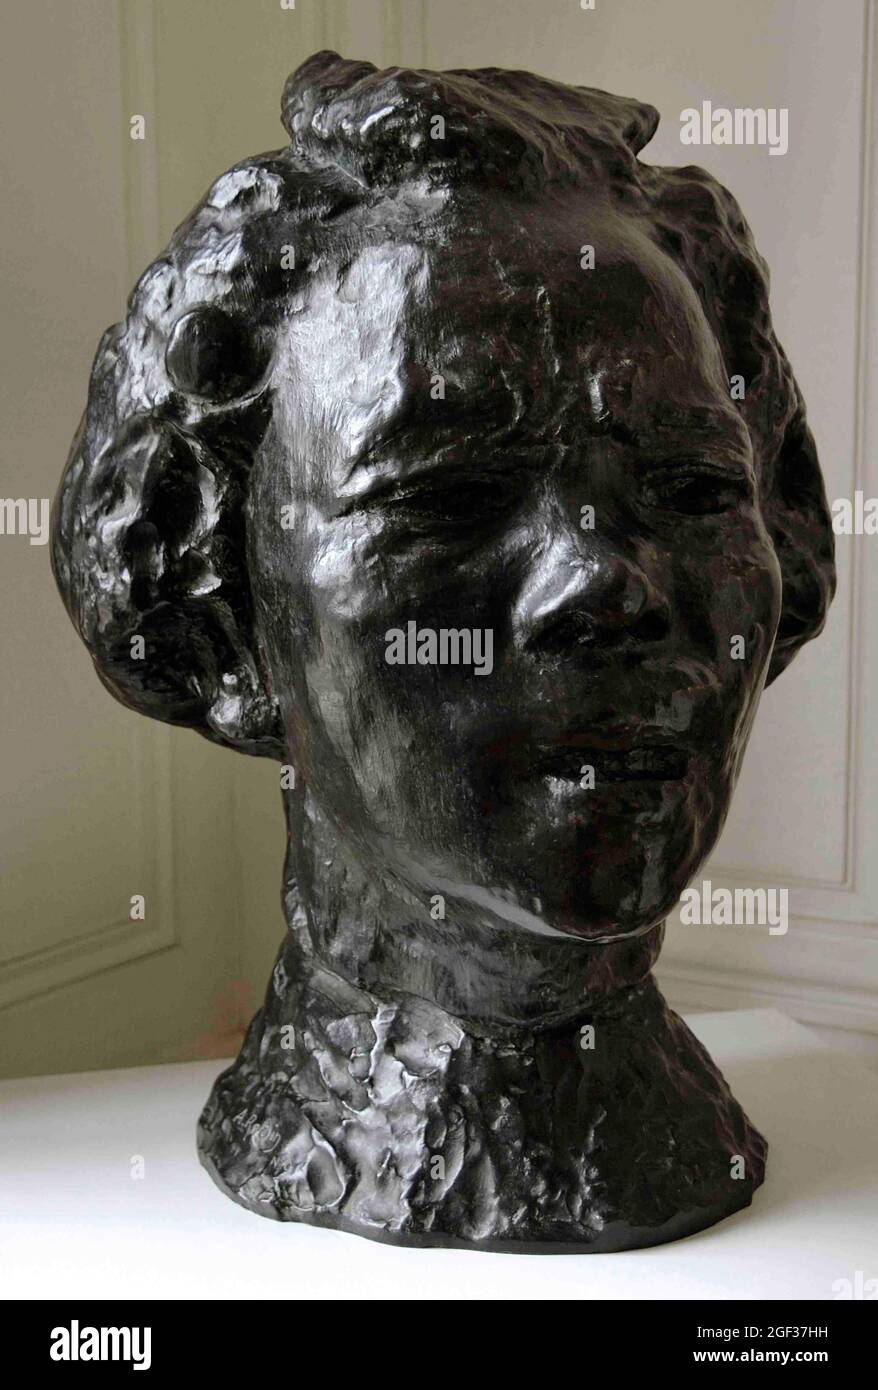 Auguste Rodin (1840-1917). French sculptor. Hanako (1868-1945). Large D-type mask, 1907. Bronze. Susse foundry. Rodin Museum. Paris. France. Stock Photo